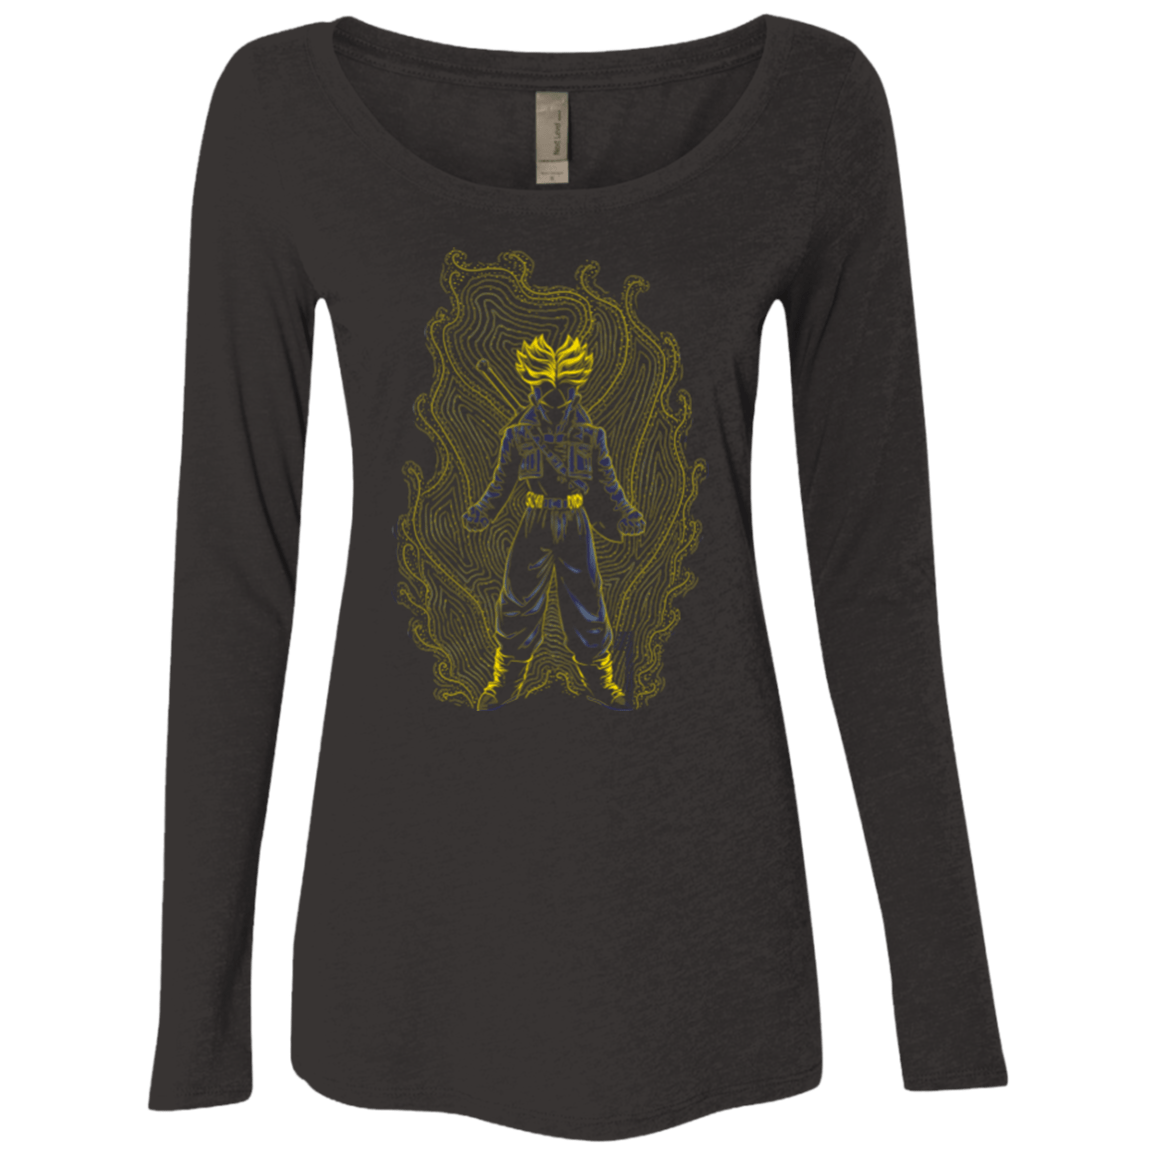 From The future Women's Triblend Long Sleeve Shirt